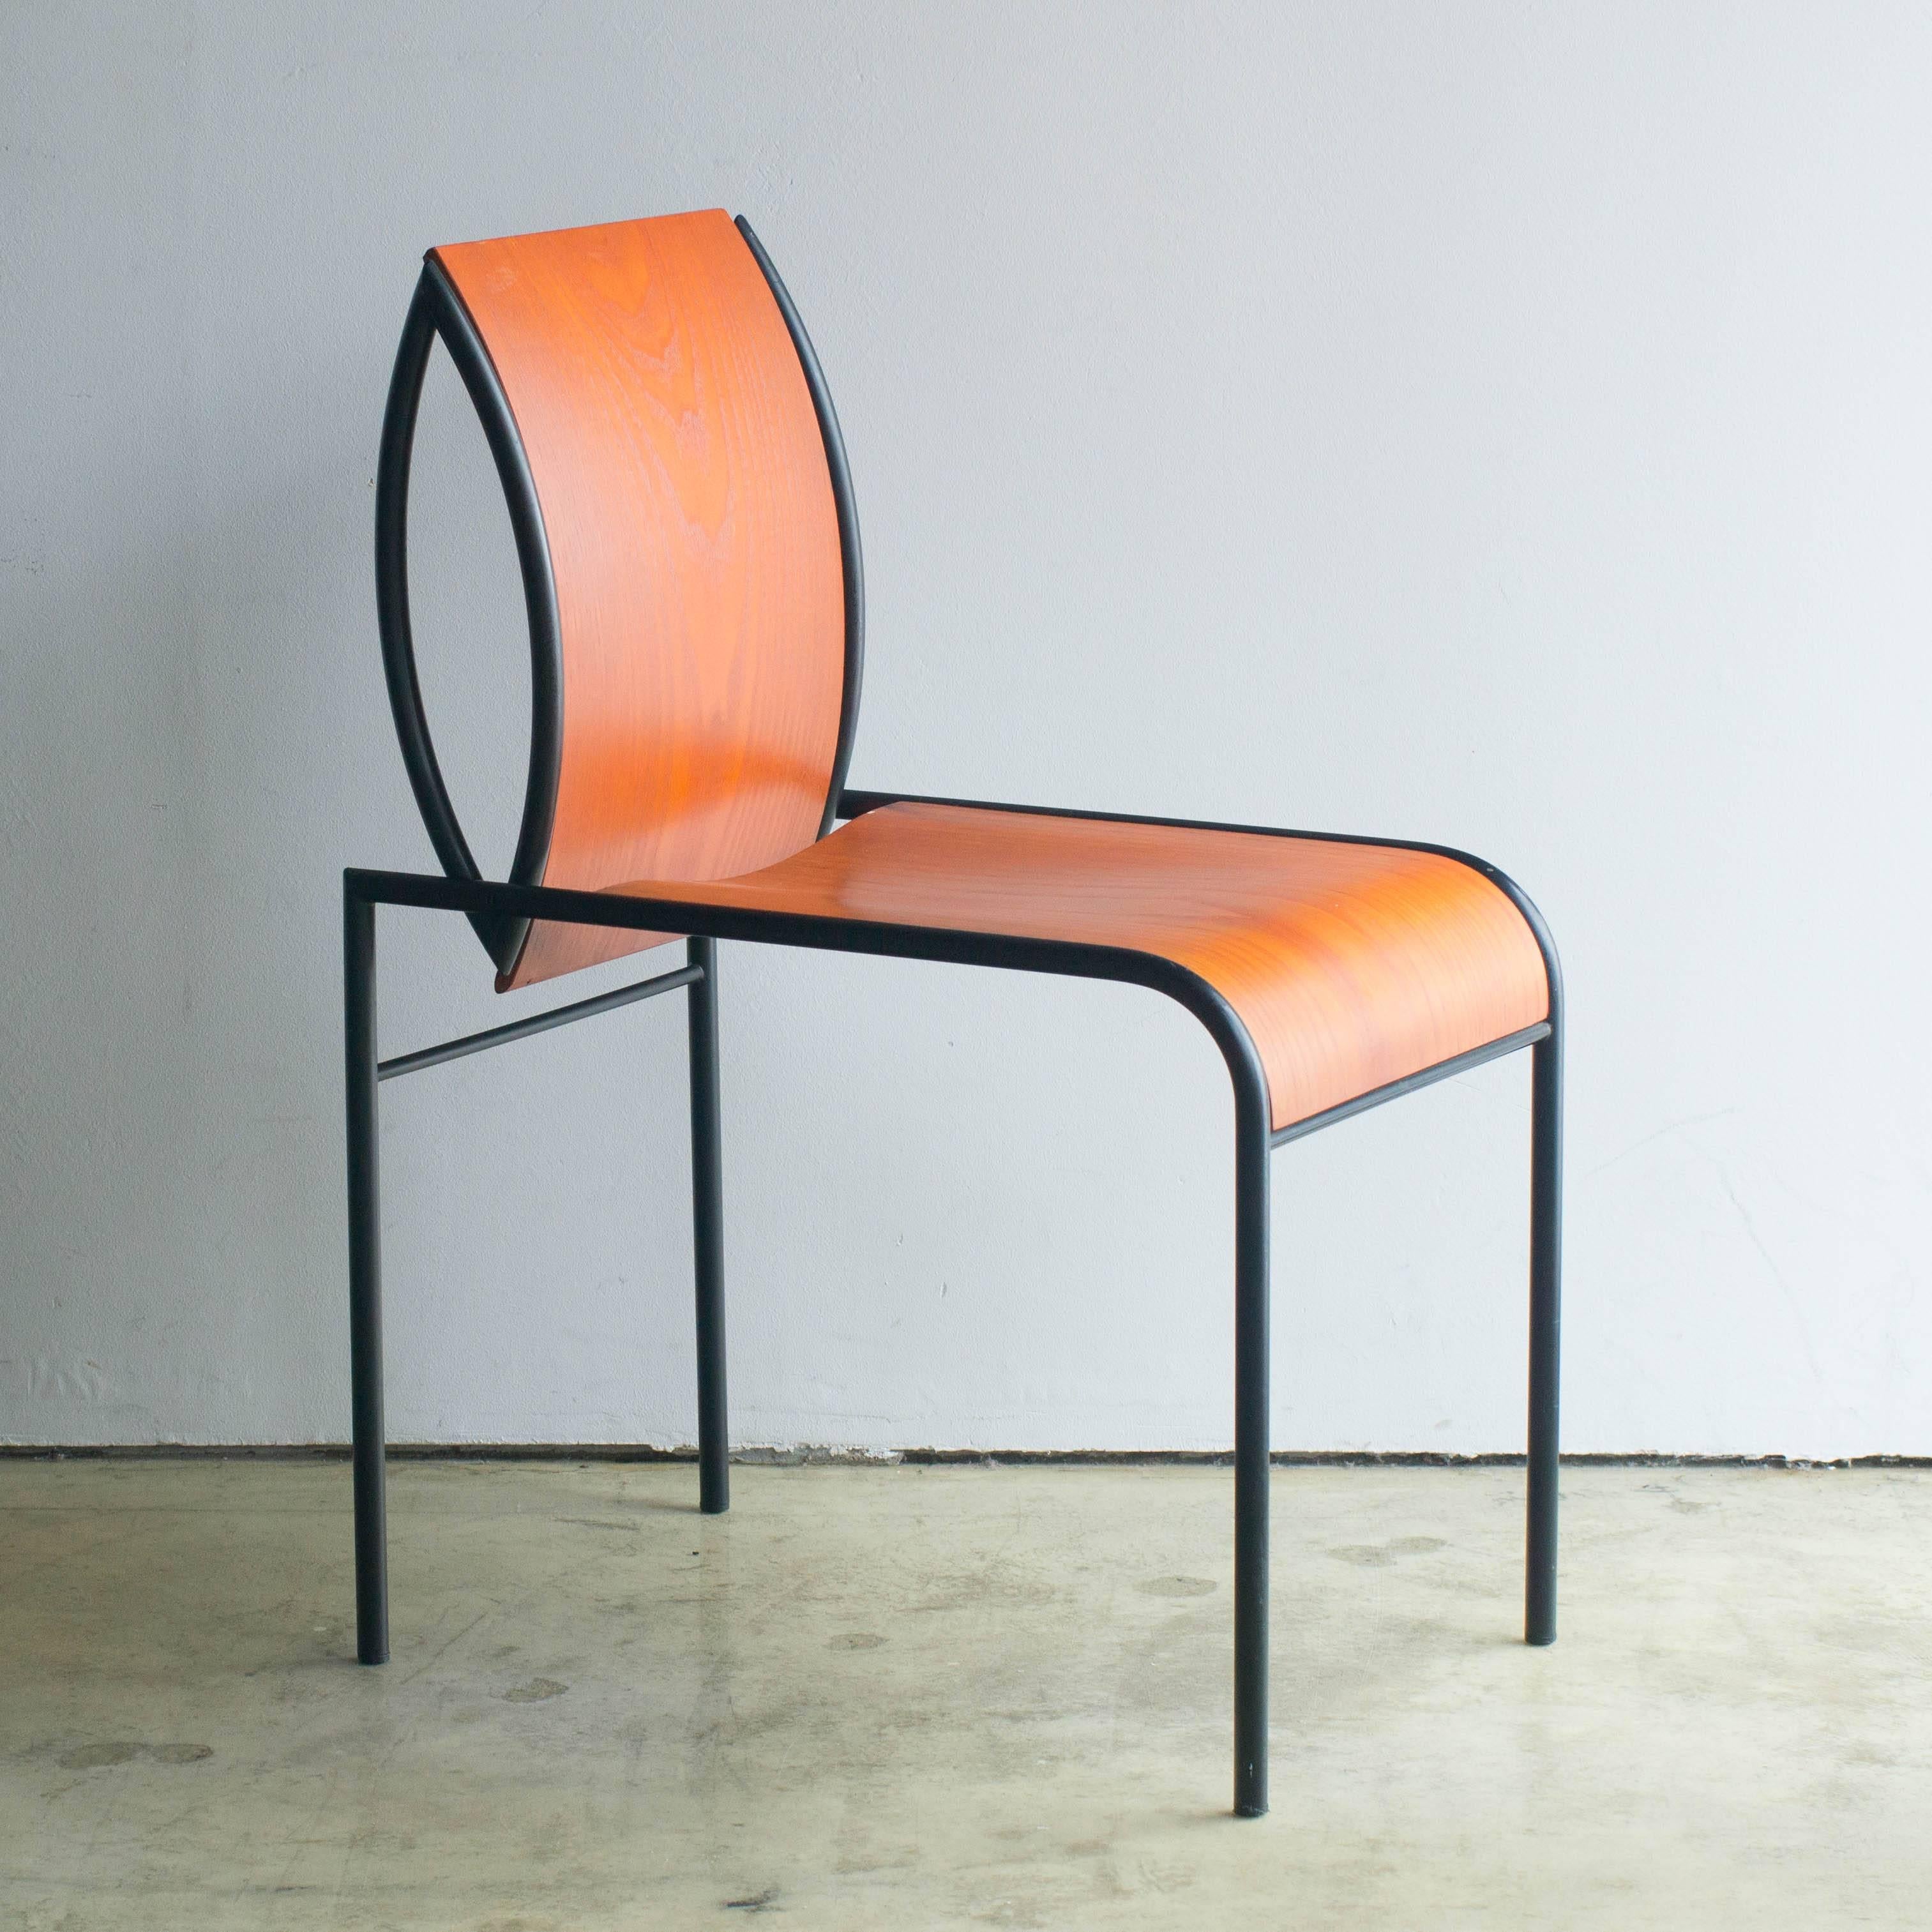 Kim chair designed by Michele De Lucchi in 1987. Made of unique shaped black steel frame and bent plywood for back and seat. Memphis logo mark is on the back of the seat. This logo is printed directly to the wood. So, I suppose it was made in the